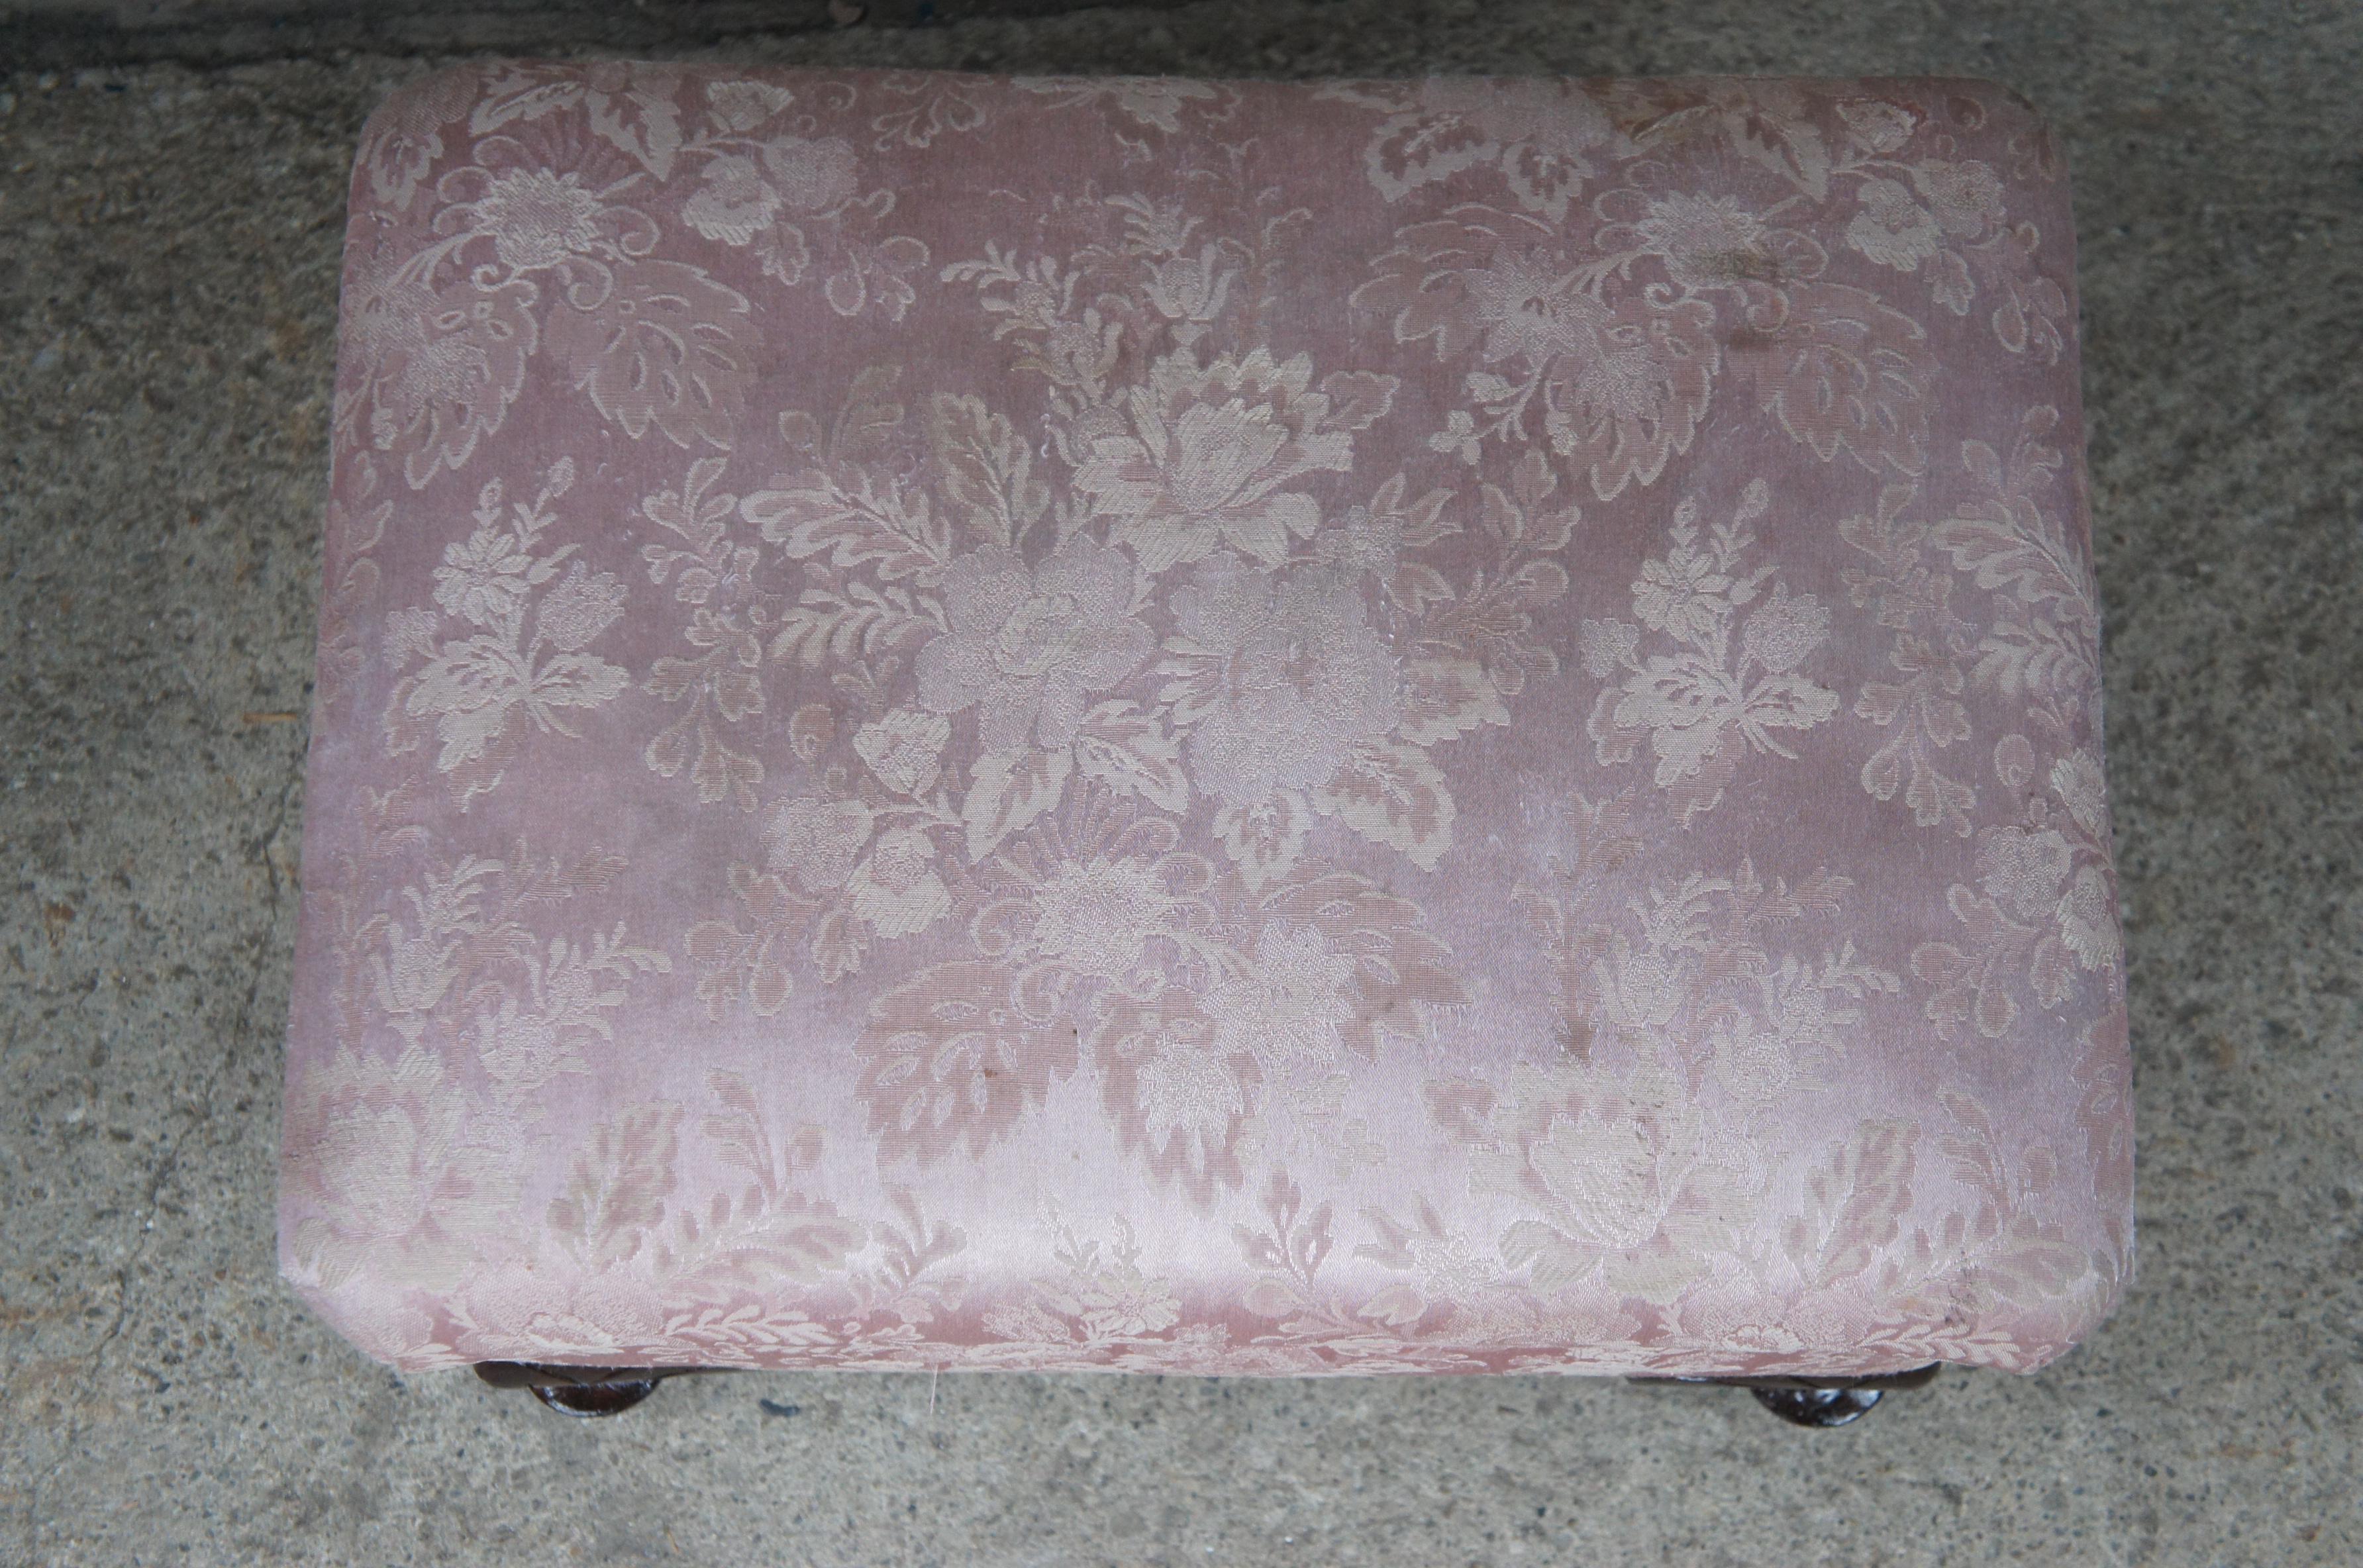 20th Century Vintage Queen Anne Floral Upholstered Walnut Ottoman Foot Stool Vanity Pouf Pink